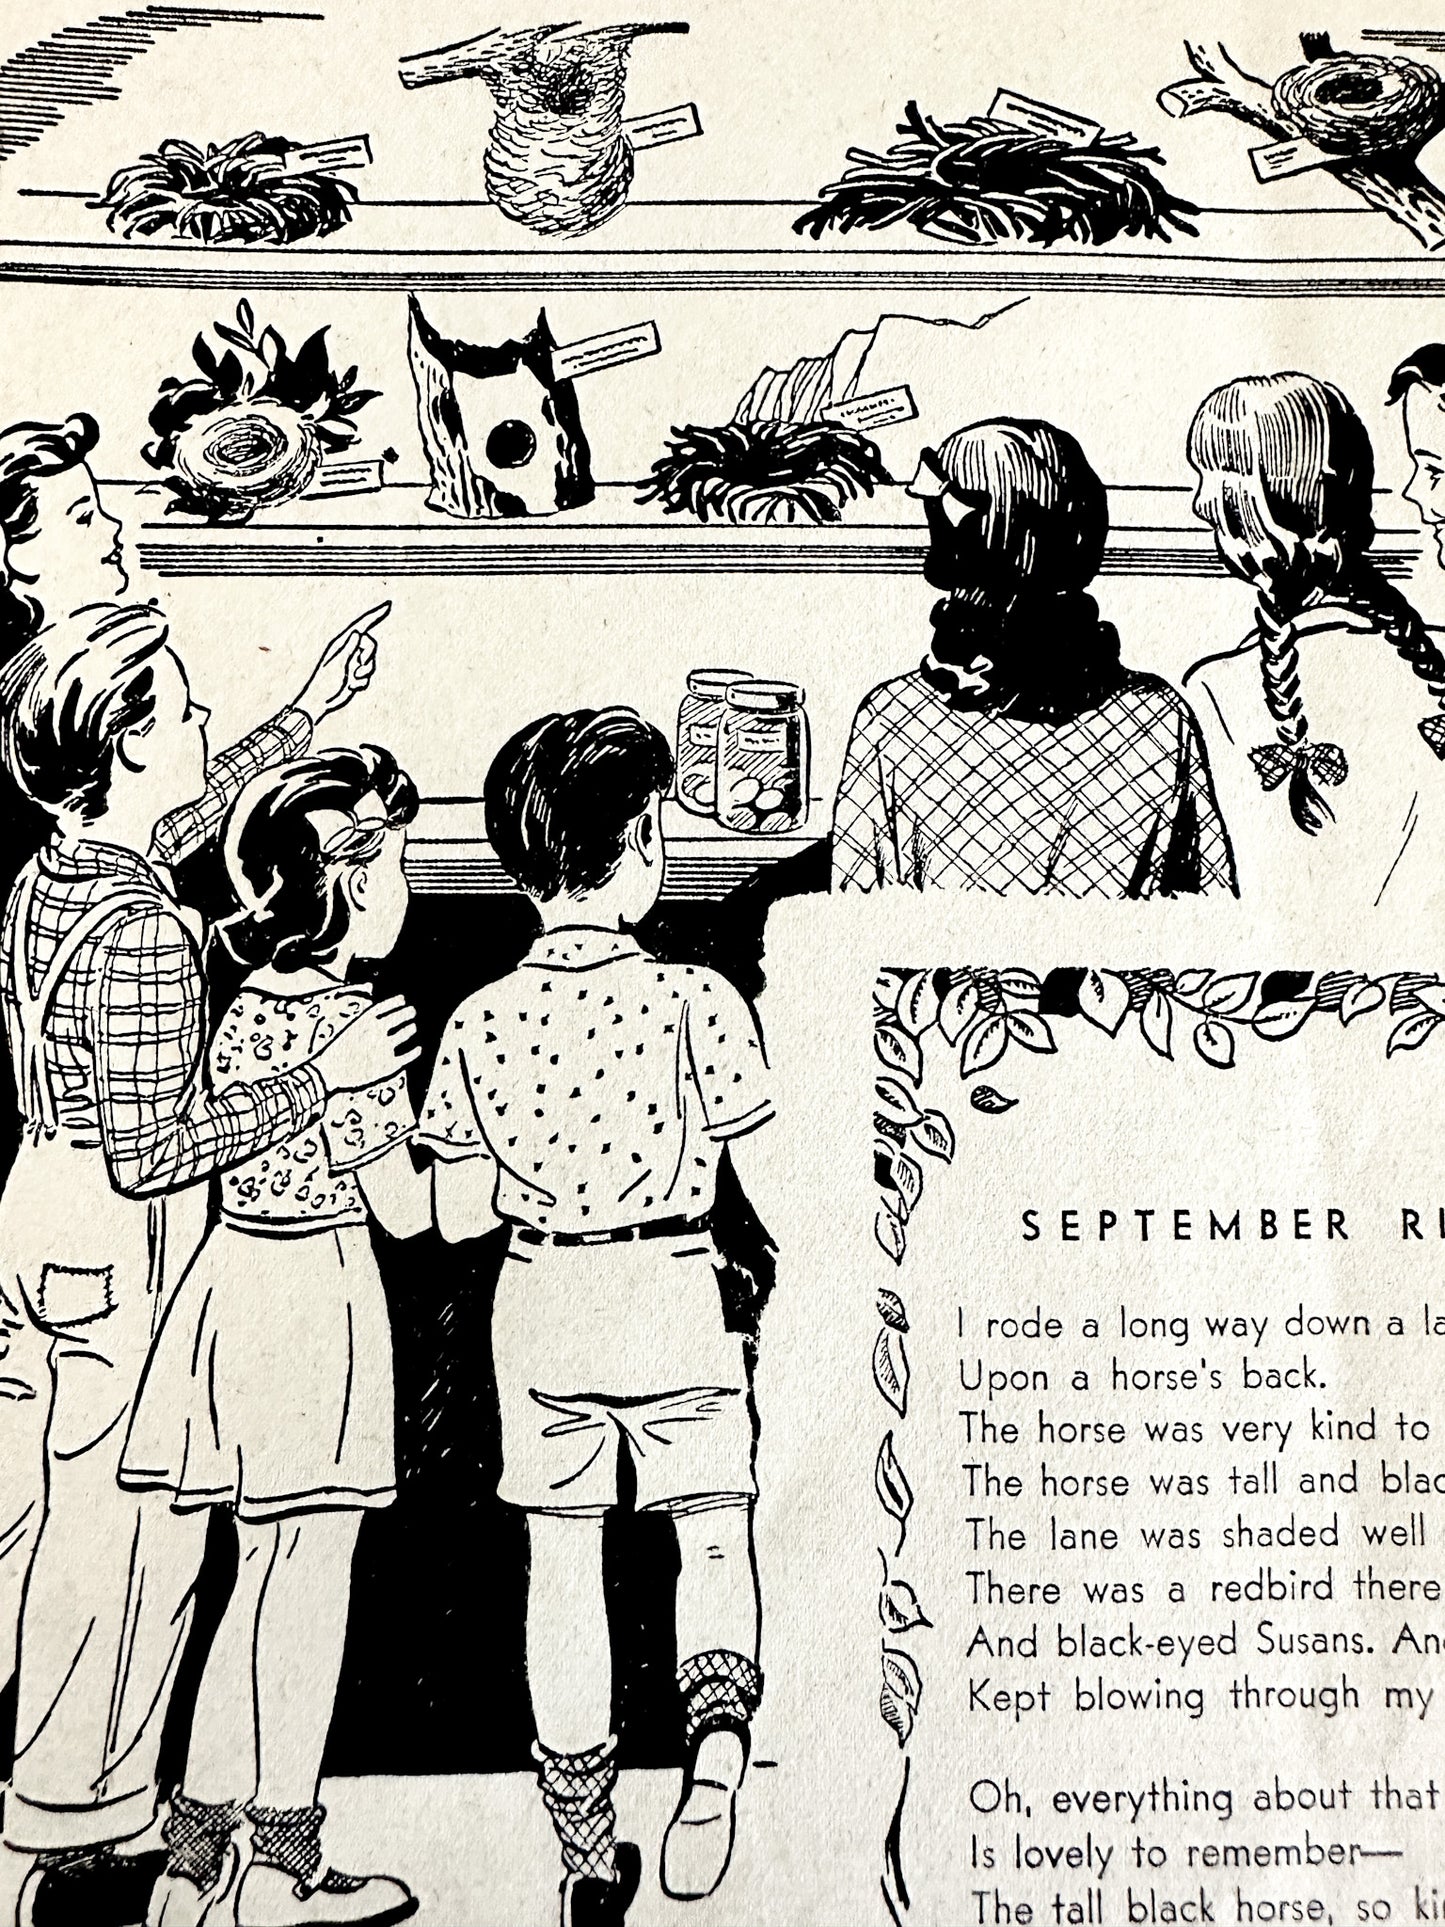 Vintage 1947 Children's Activities for Home and School Magazine | September 1947 Activity Magazine for Kids